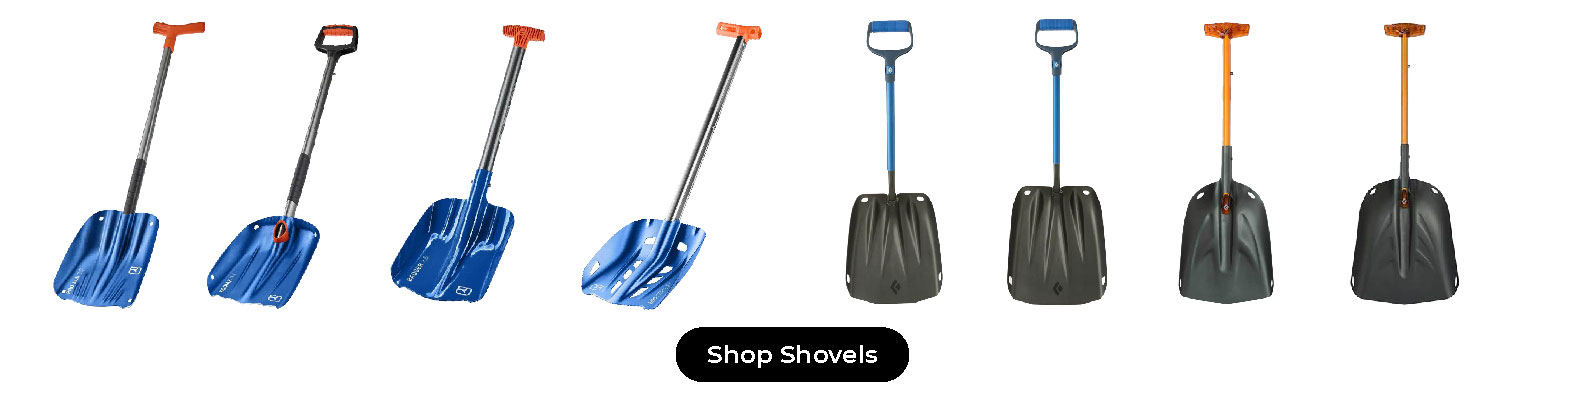 8 avalanche shovels made by Ortovox and Black Diamond